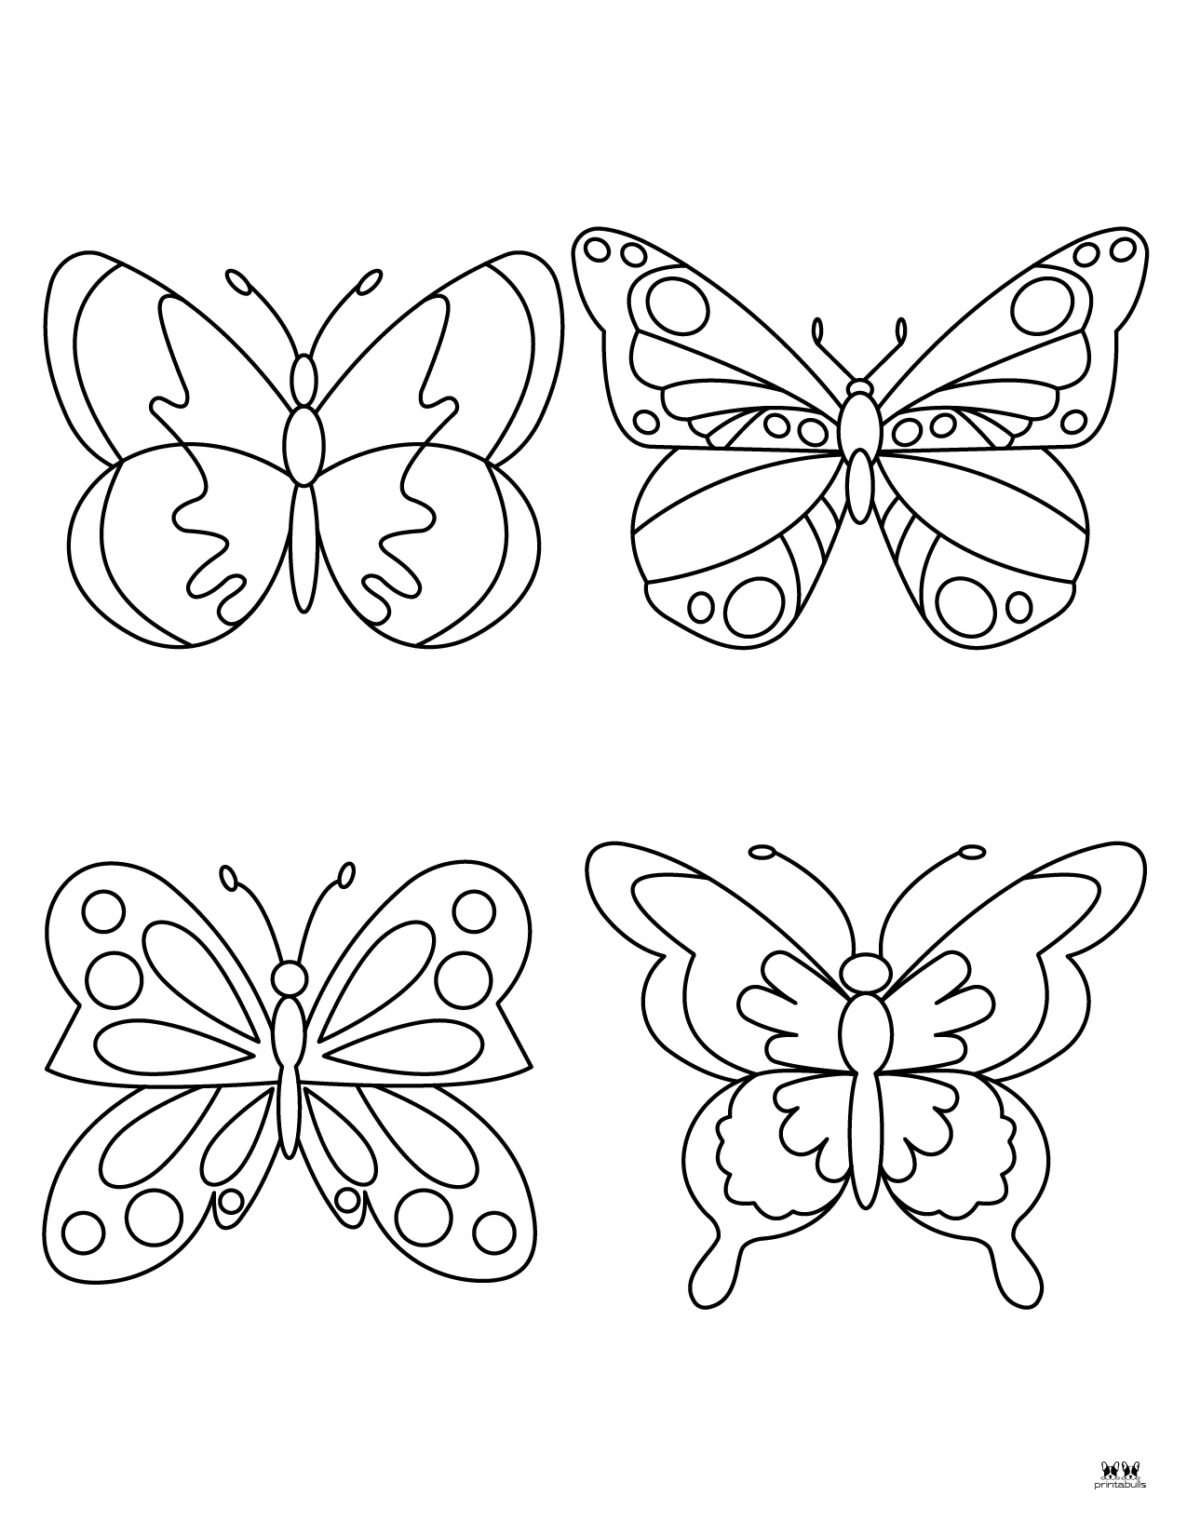 Butterfly Coloring Pages - 50 FREE Pages | Printabulls